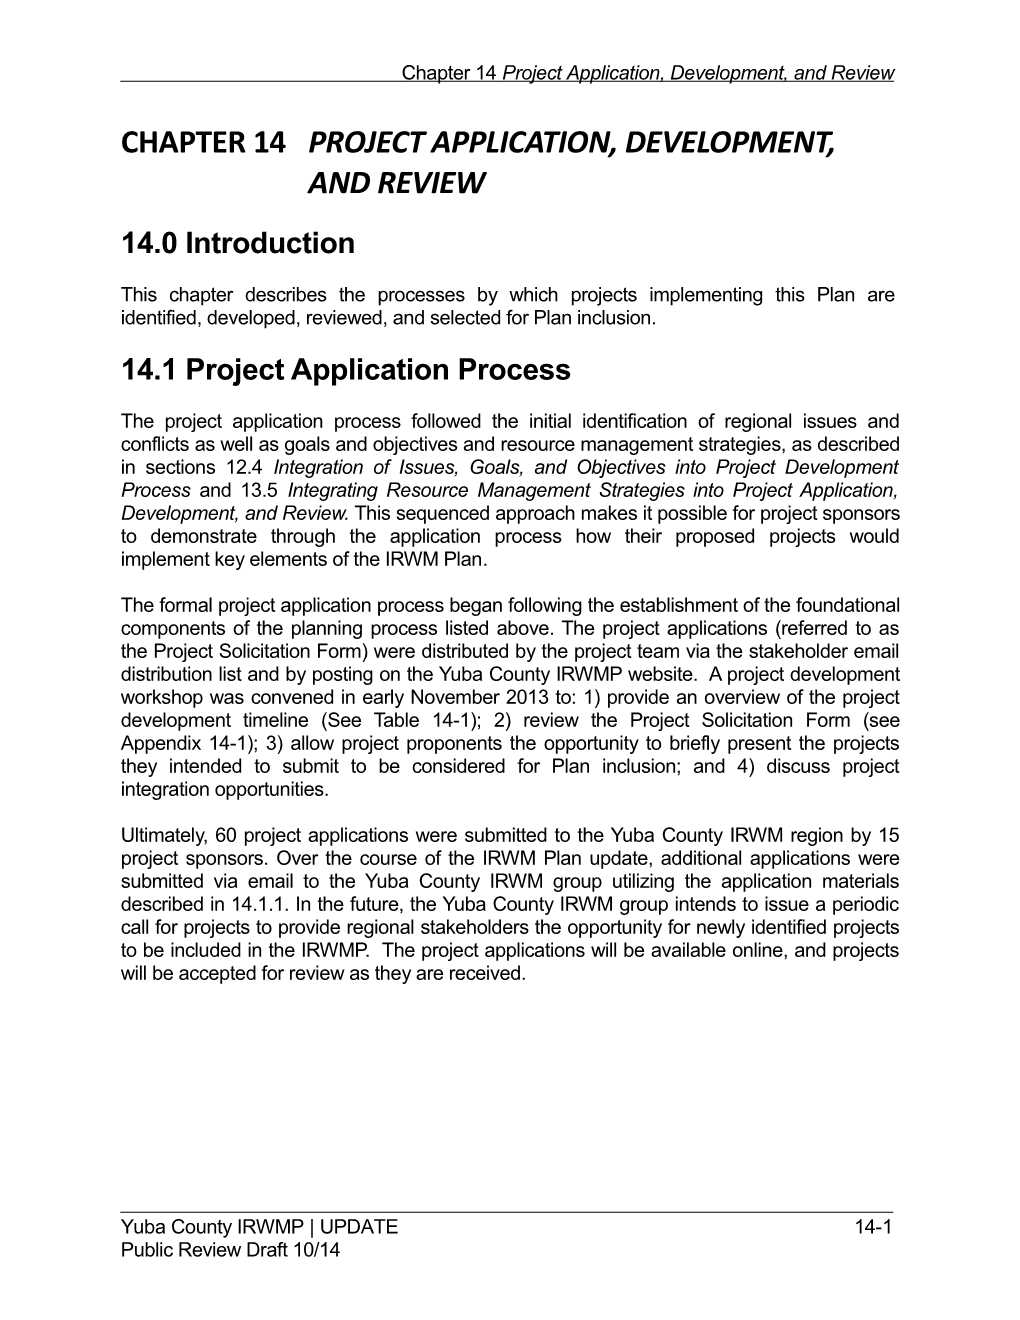 Chapter 14Project Application, Development, and Review